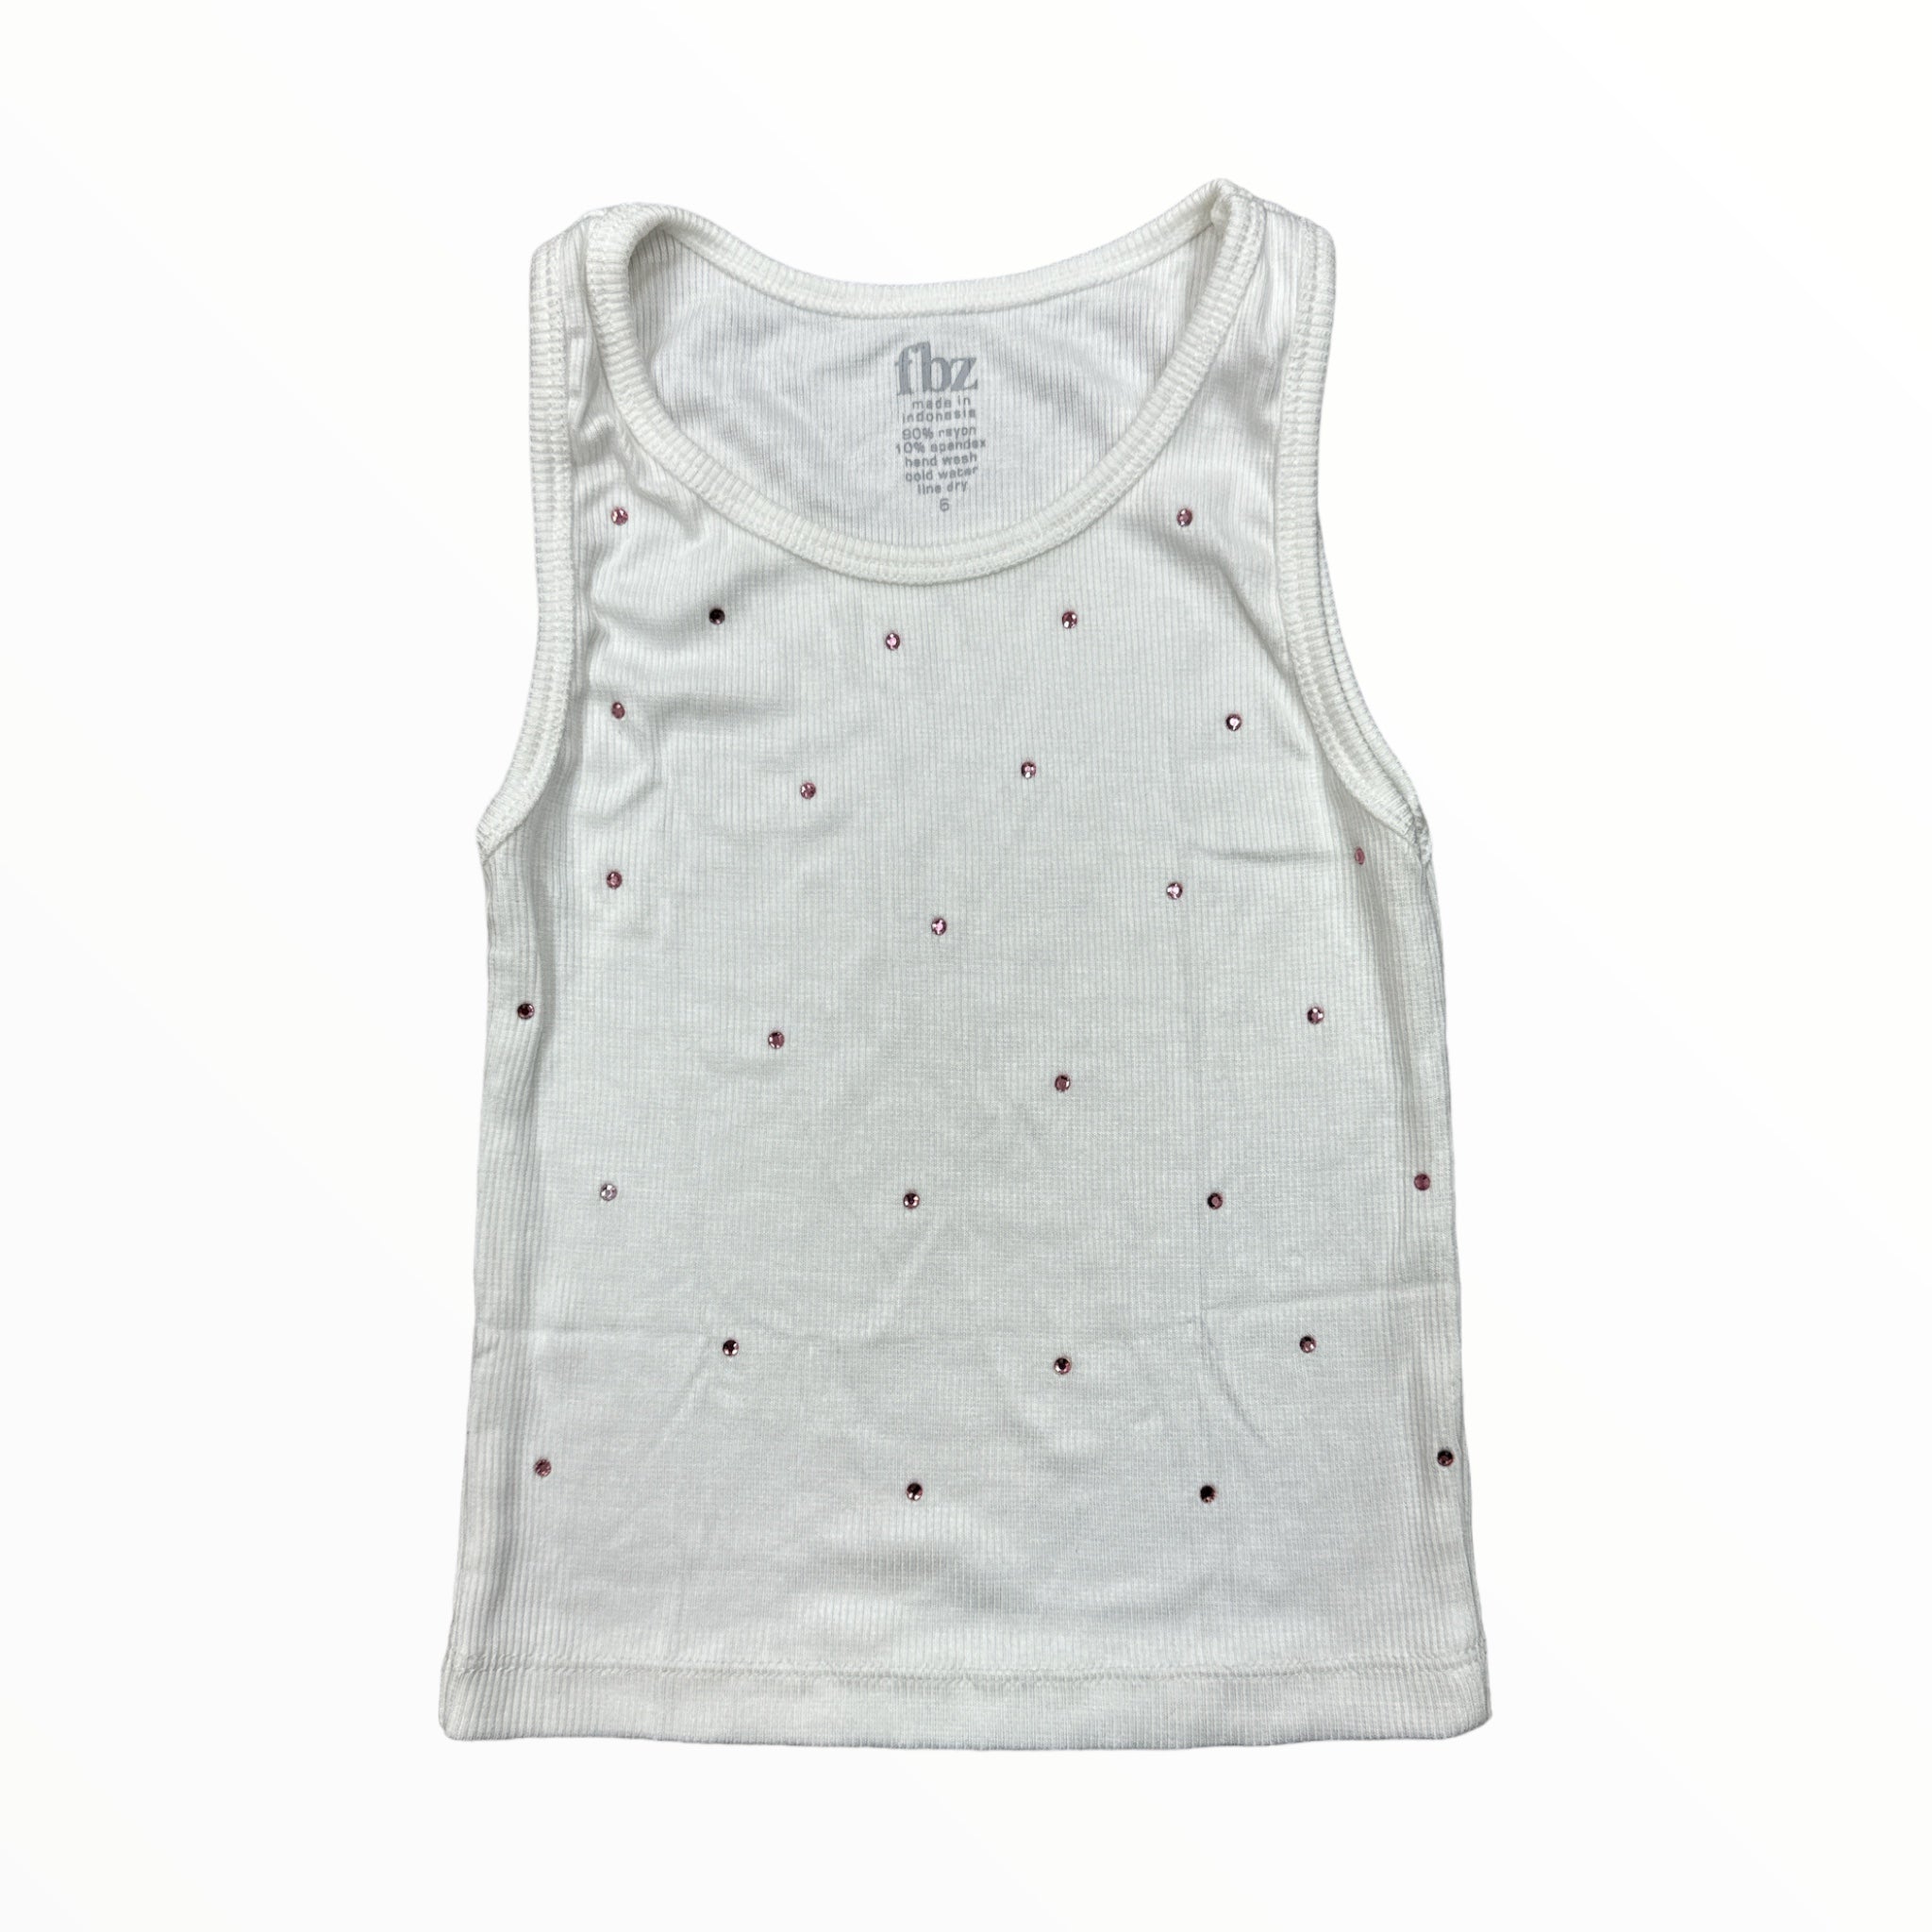 FLOWERS BY ZOE RIBBED TANK - WHITE/MULTI STONE